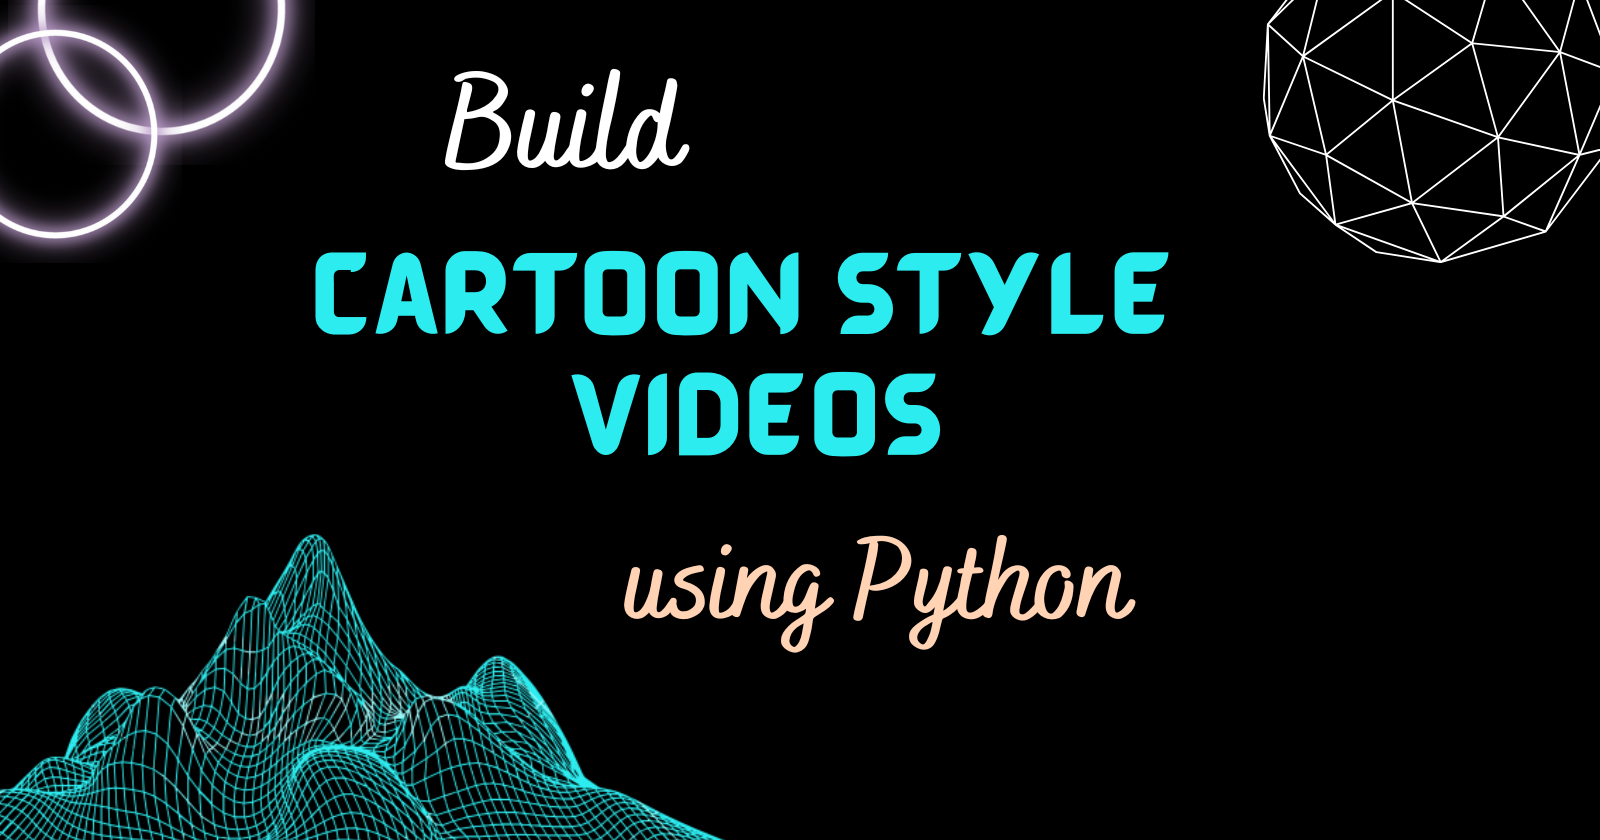 Building a cartoon-styled video using Python 🐍